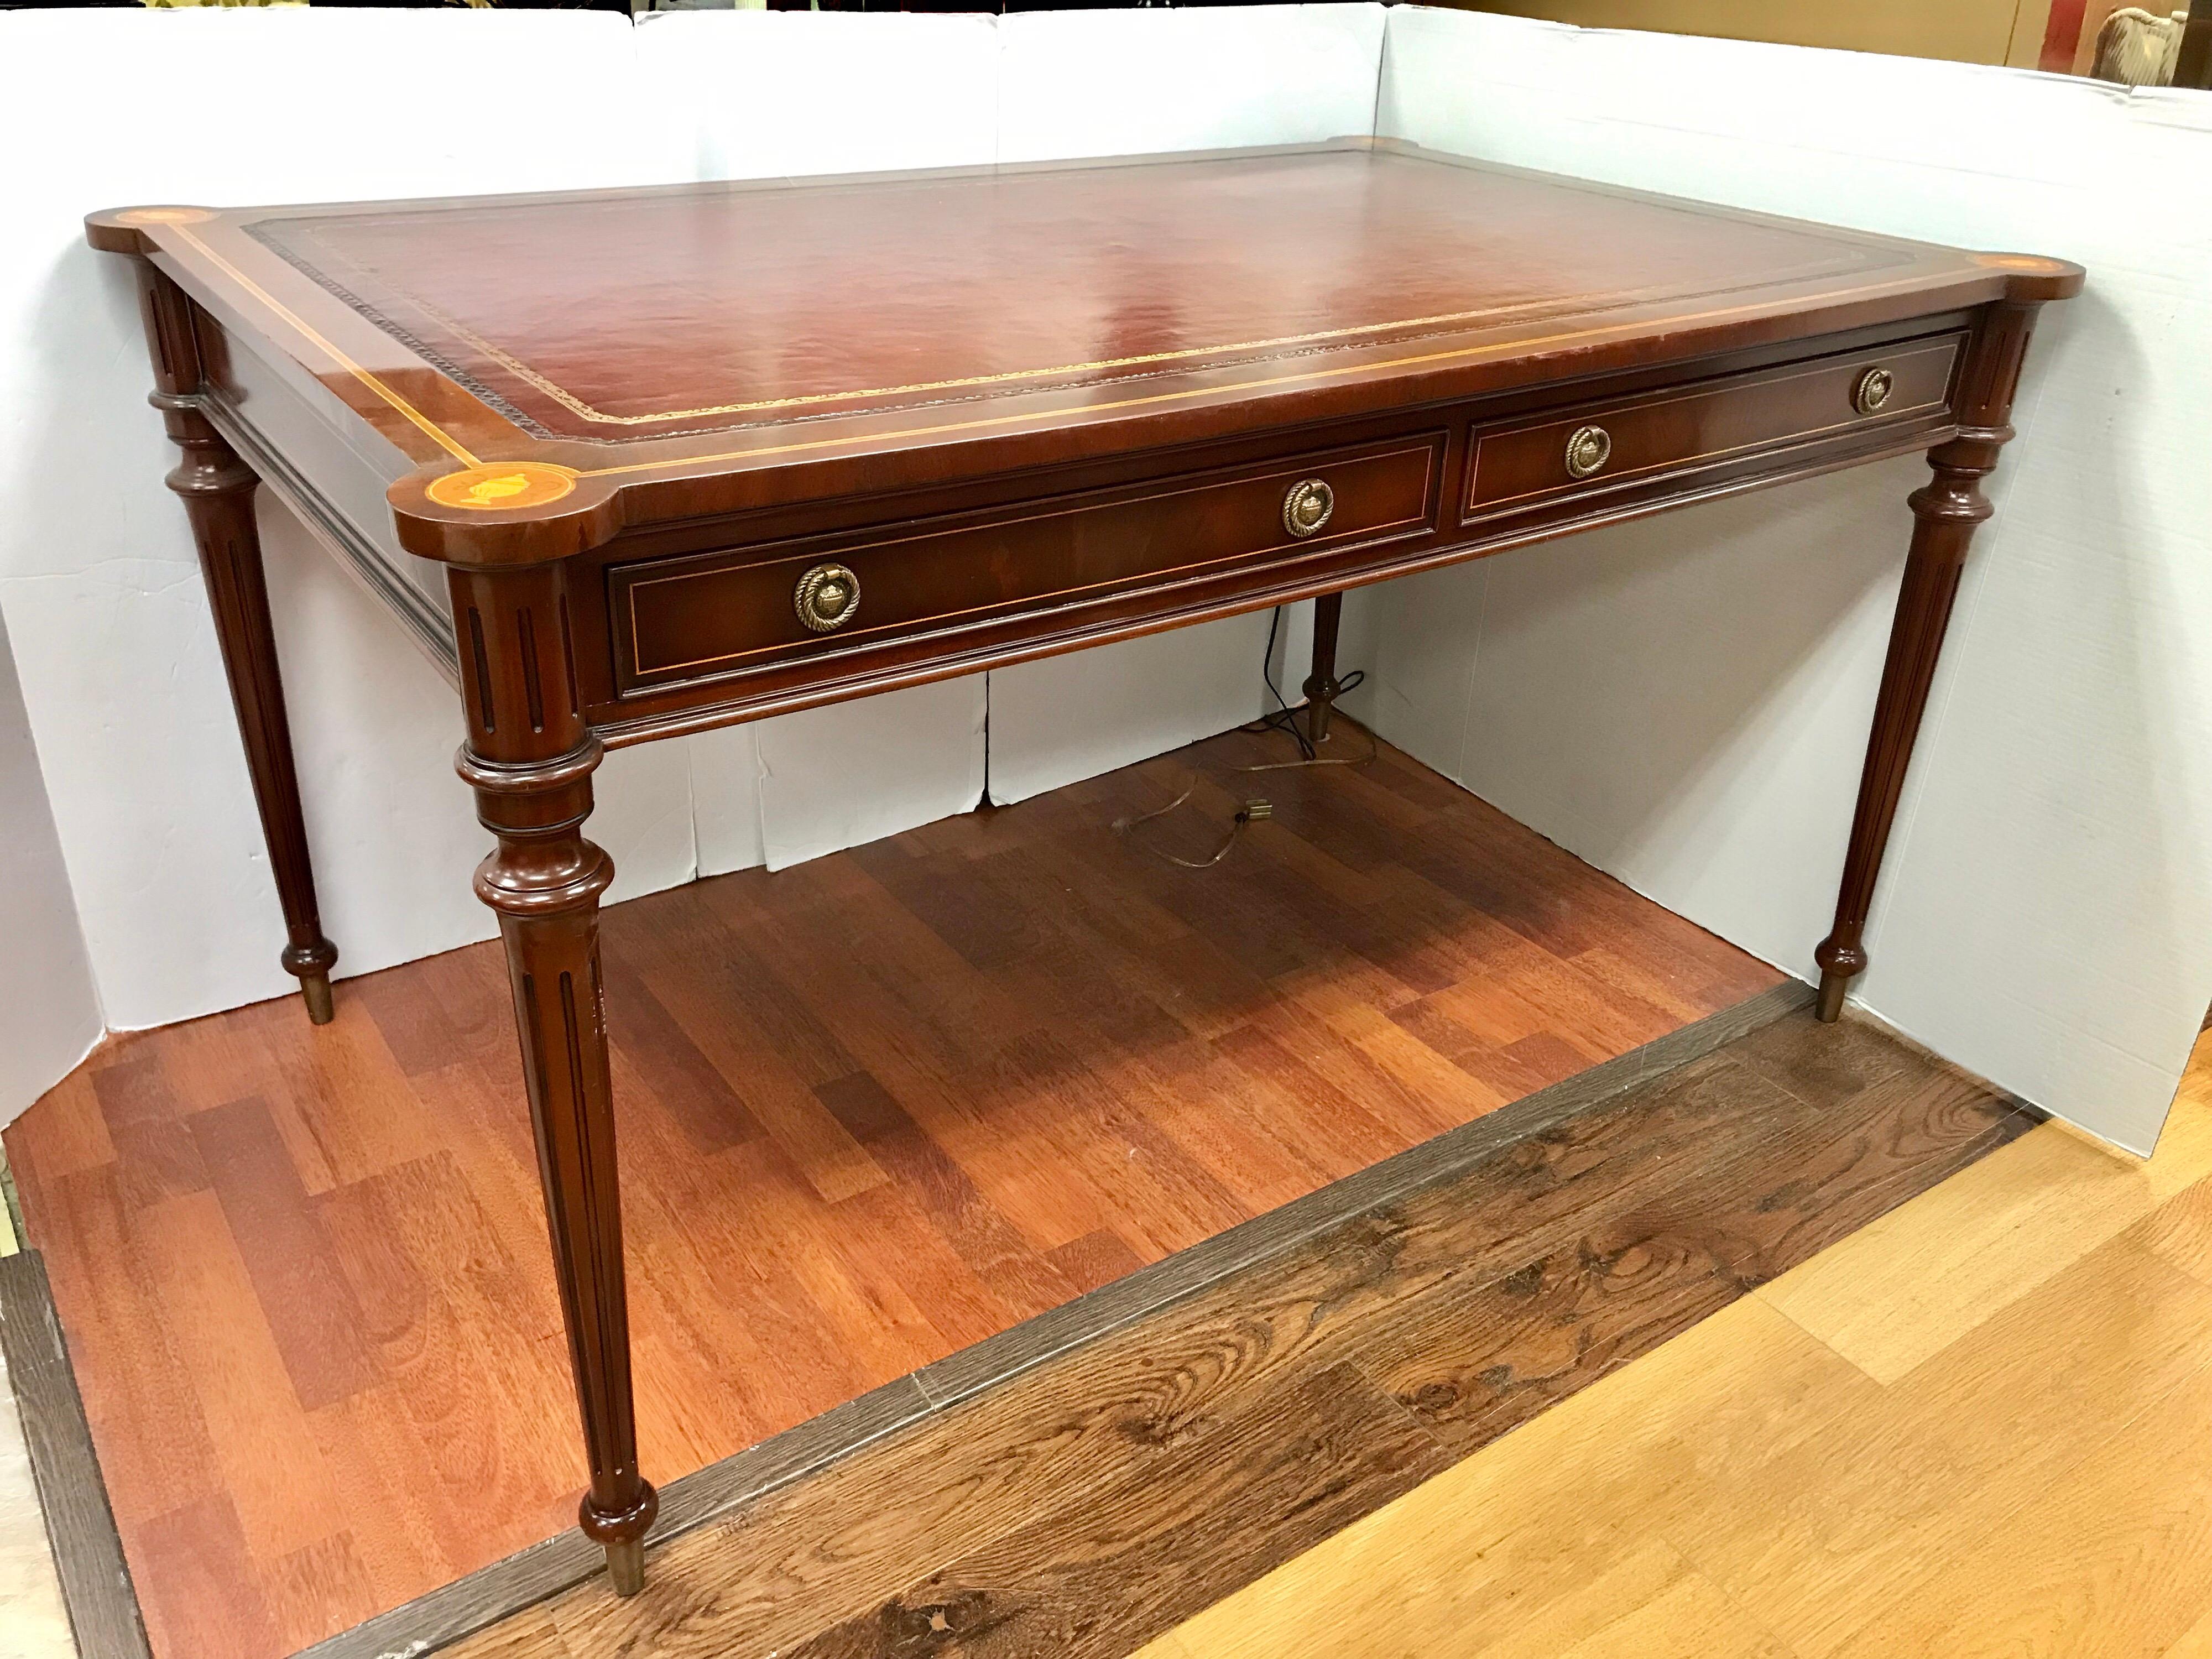 Magnificent mahogany writing desk with leather top and inlay and medallions.
Two drawers at top. Exceptional design and condition.